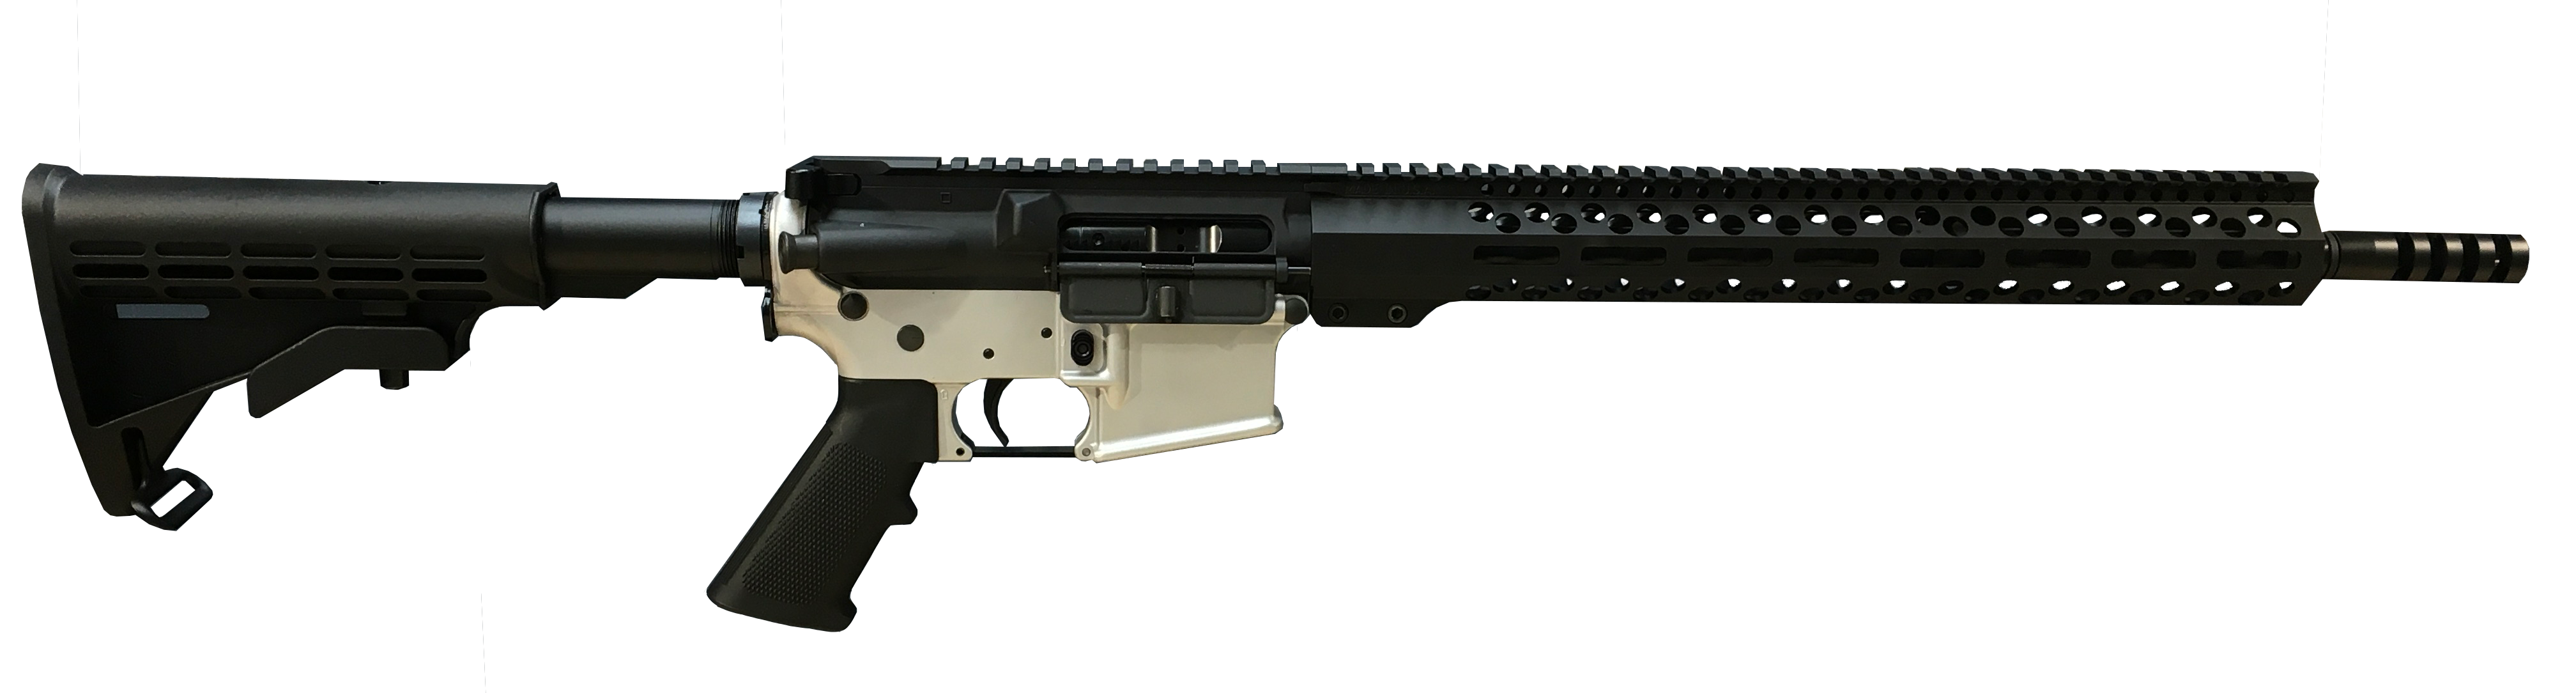 Ar 15 Png